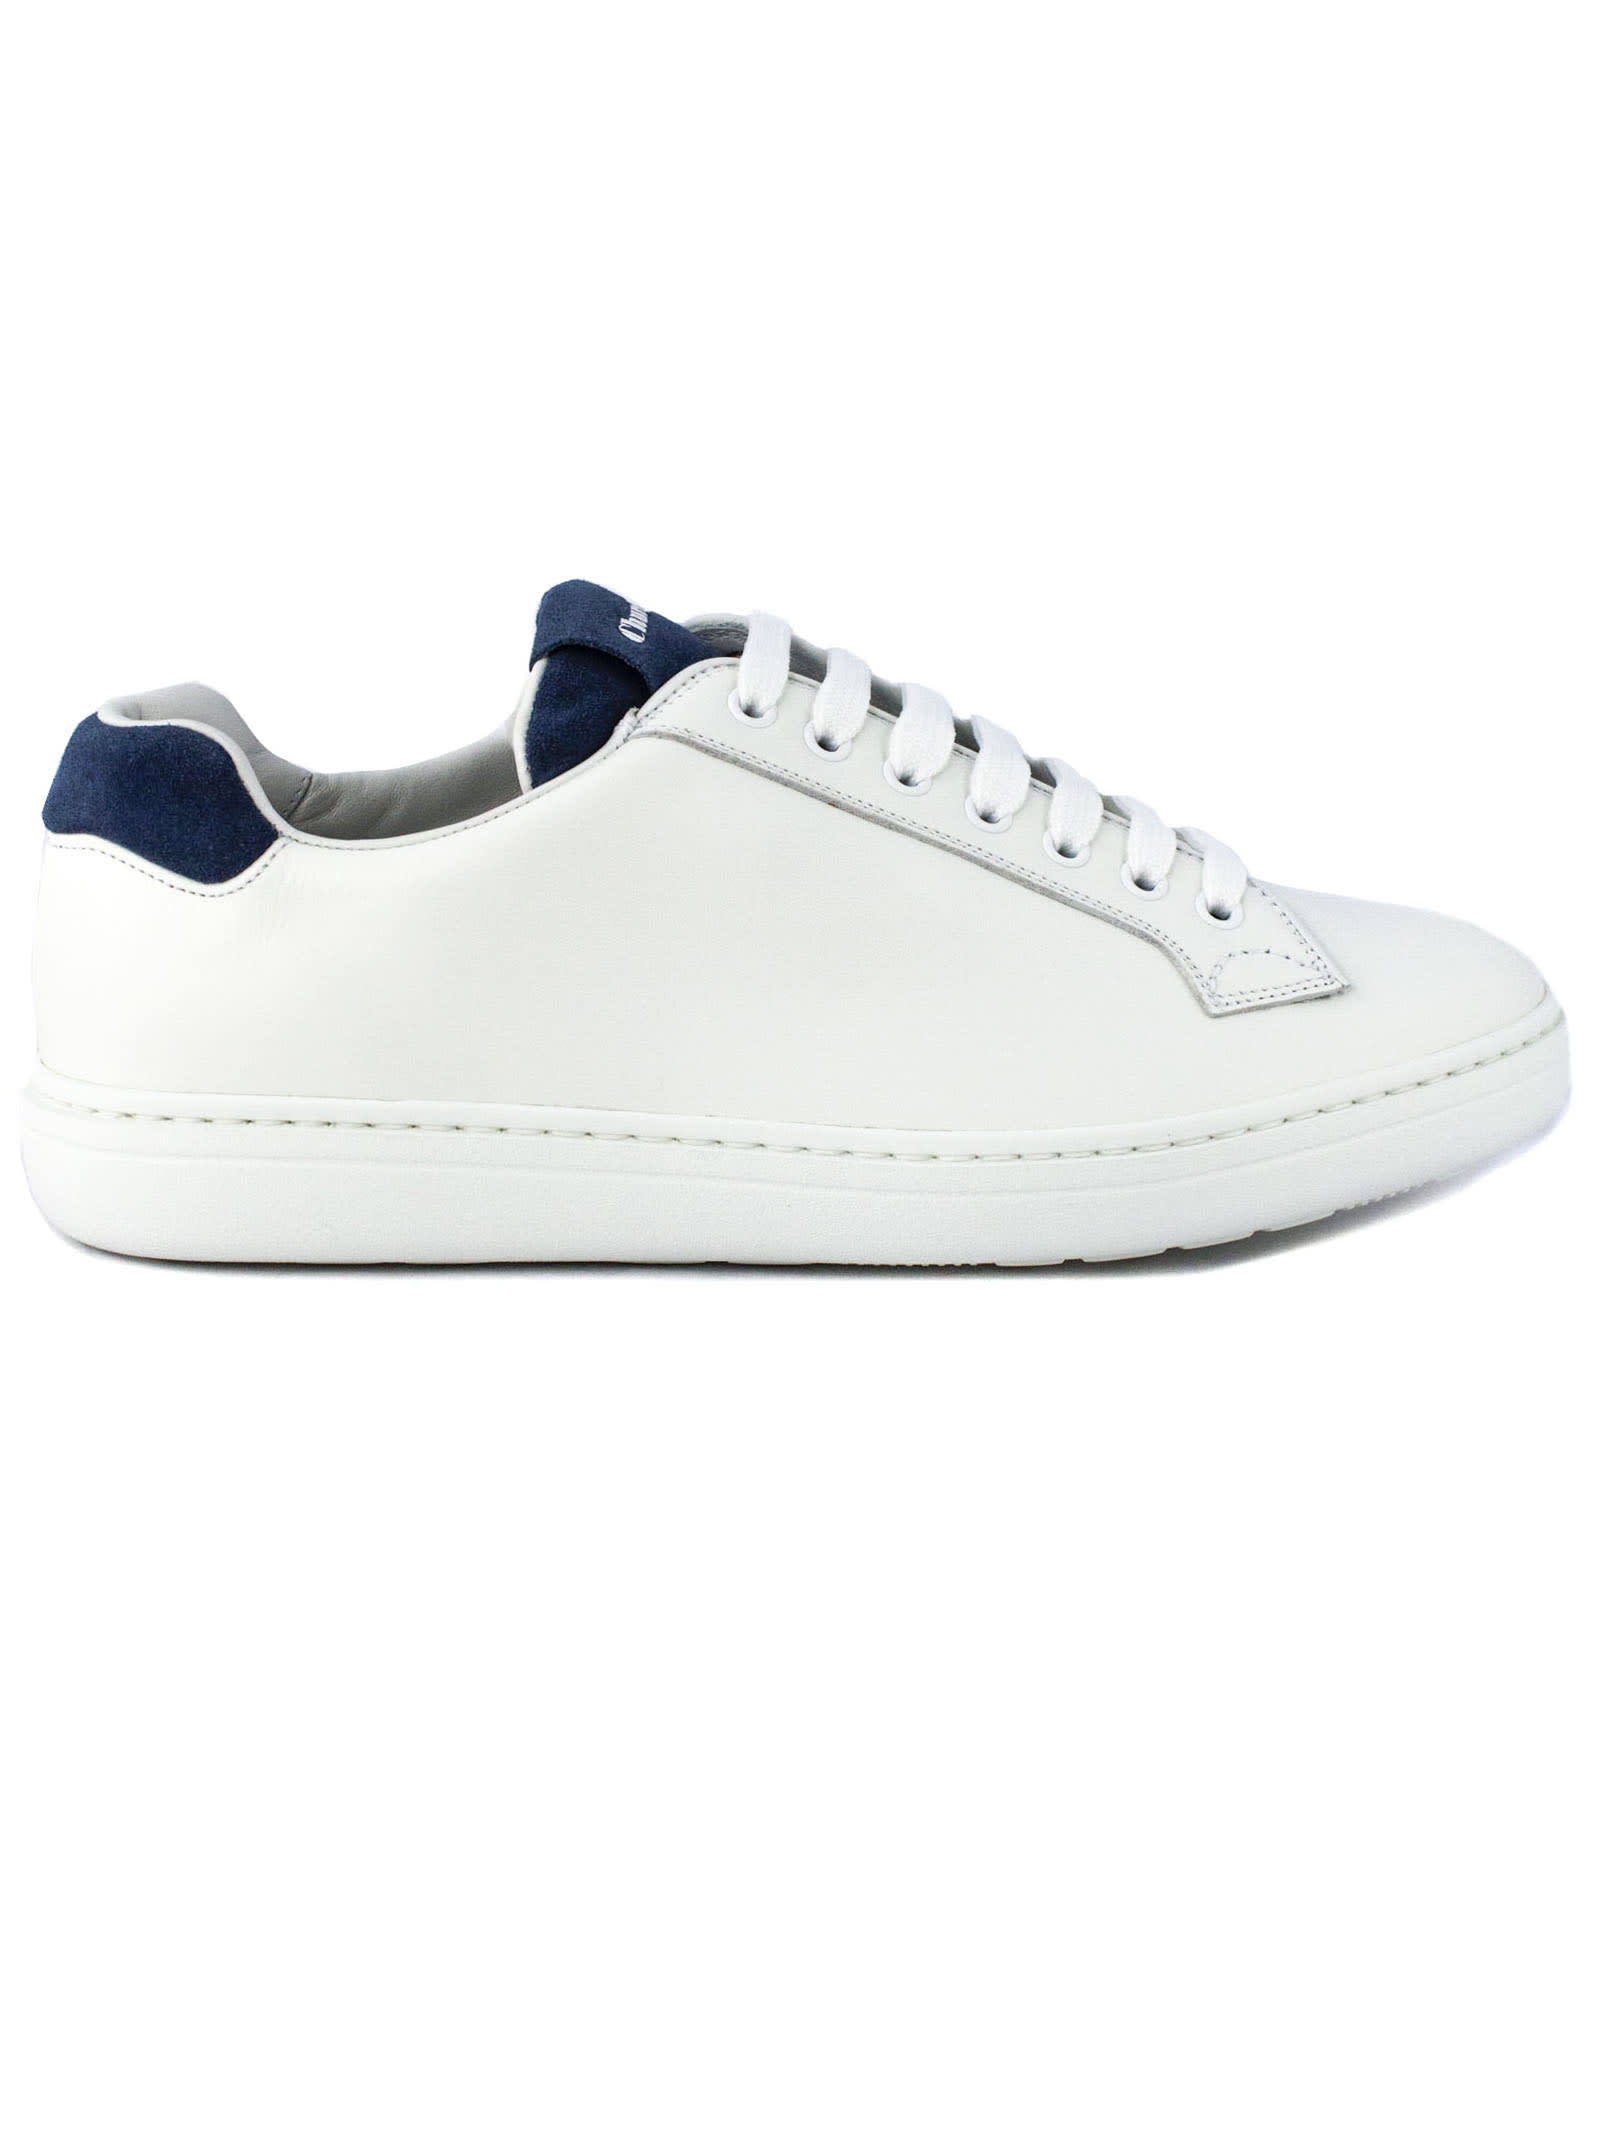 CHURCH'S CLASSIC SNEAKER WHITE LEATHER,11268188